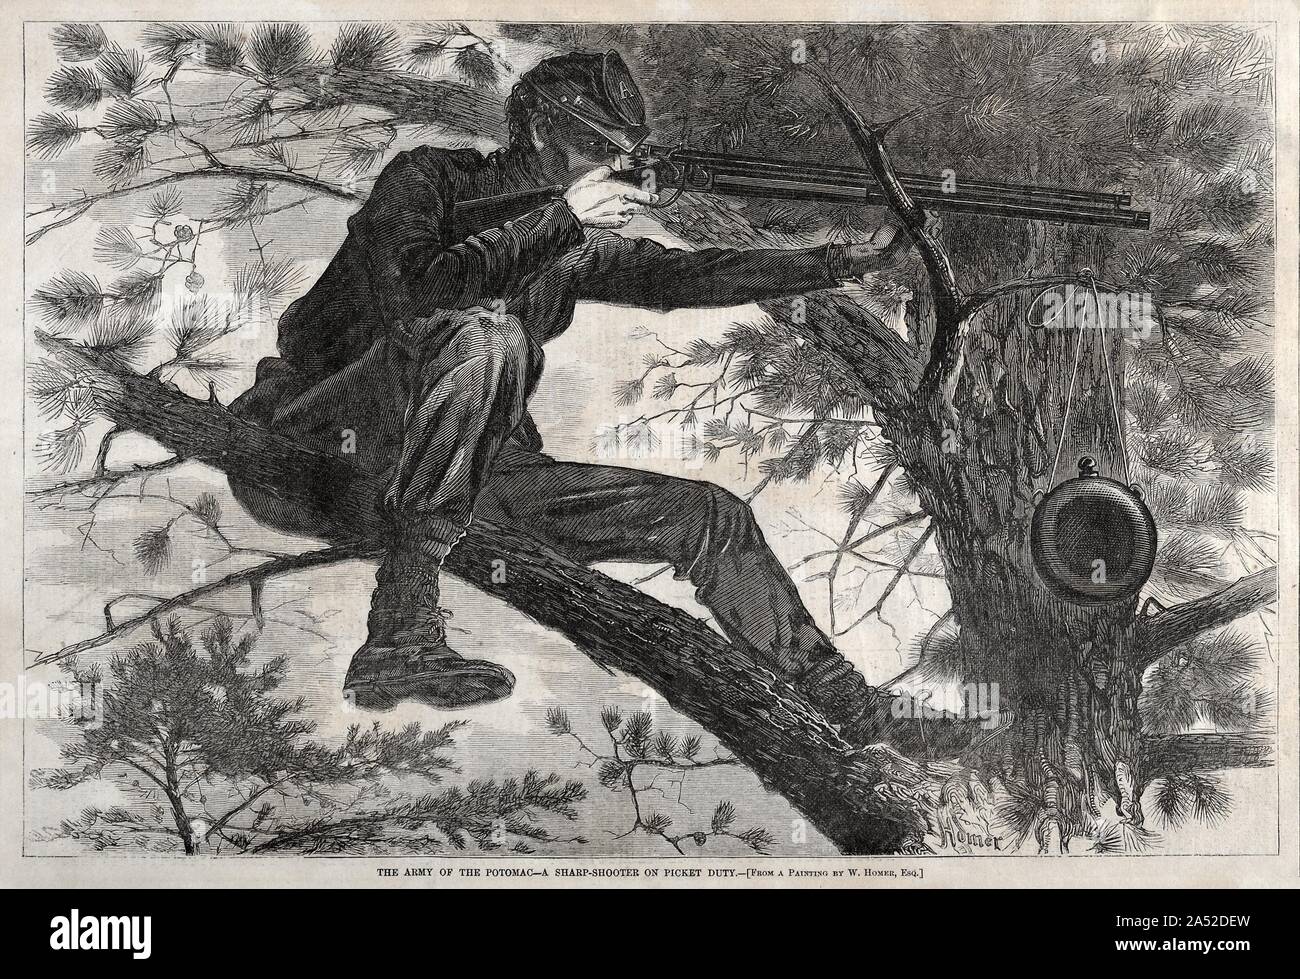 The Army of the Potomac - A Sharpshooter on Picket Duty, 1862. Although now most famous as a painter, Homer was also a graphic artist throughout his career and from 1857 provided illustrations for the New York-based Harper's Weekly. When the Civil War began in 1861, the magazine sent Homer to Virginia, where he made numerous drawings of the military. He seldom depicted actual fighting, instead candidly describing everyday camp life. The drawings were reproduced as wood engravings (professionals cut the blocks)-the technique used to reproduce illustrations in magazines and books before the deve Stock Photo